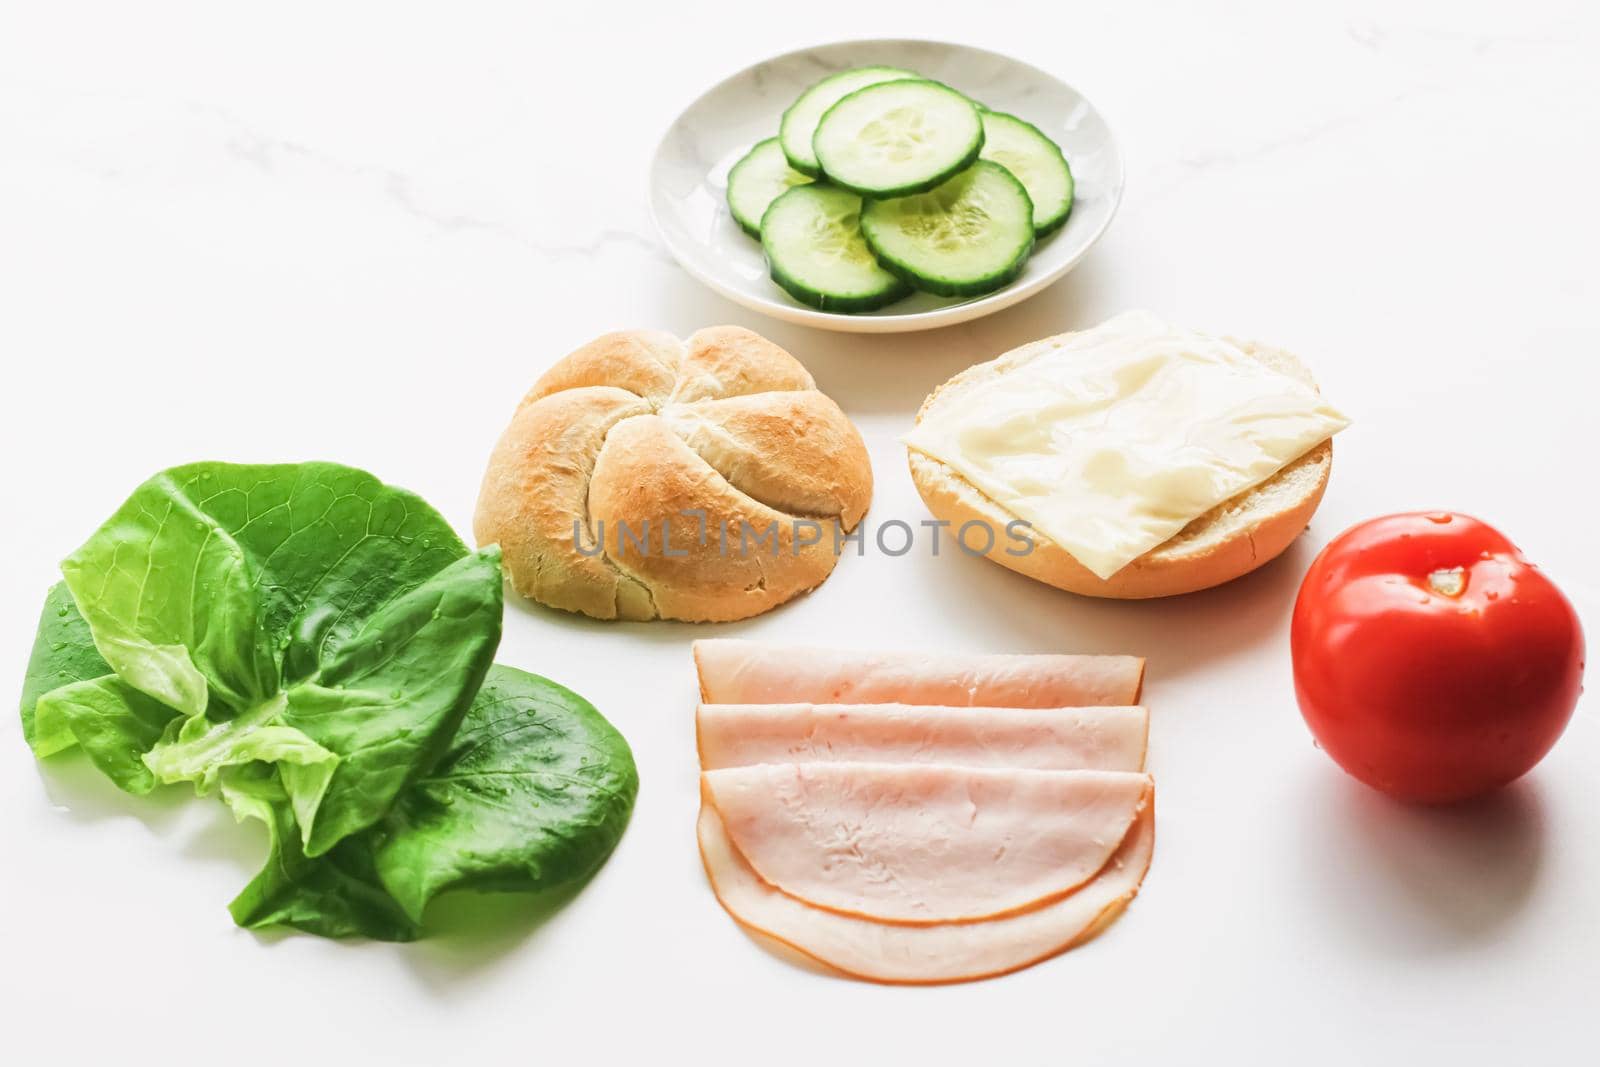 Food products and ingredients for making sandwich. Ham, cheese, burger bun, lettuce, cucumber and tomato as recipe flatlay on marble kitchen table background